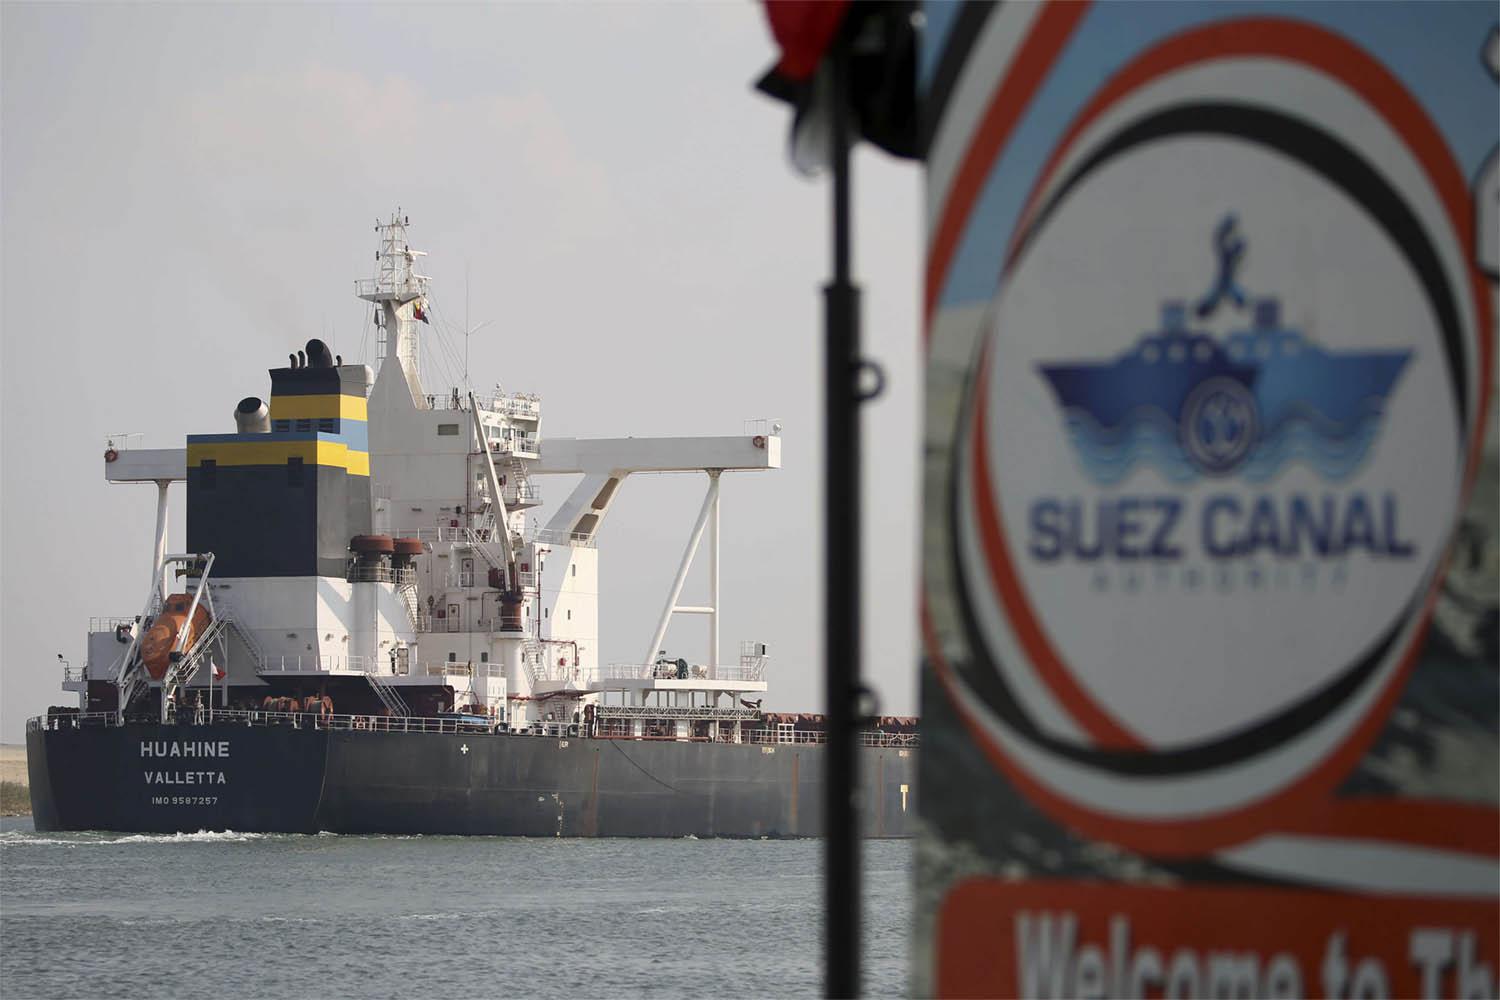 Suez Canal’s revenues rose by 13.9% compared to April last year